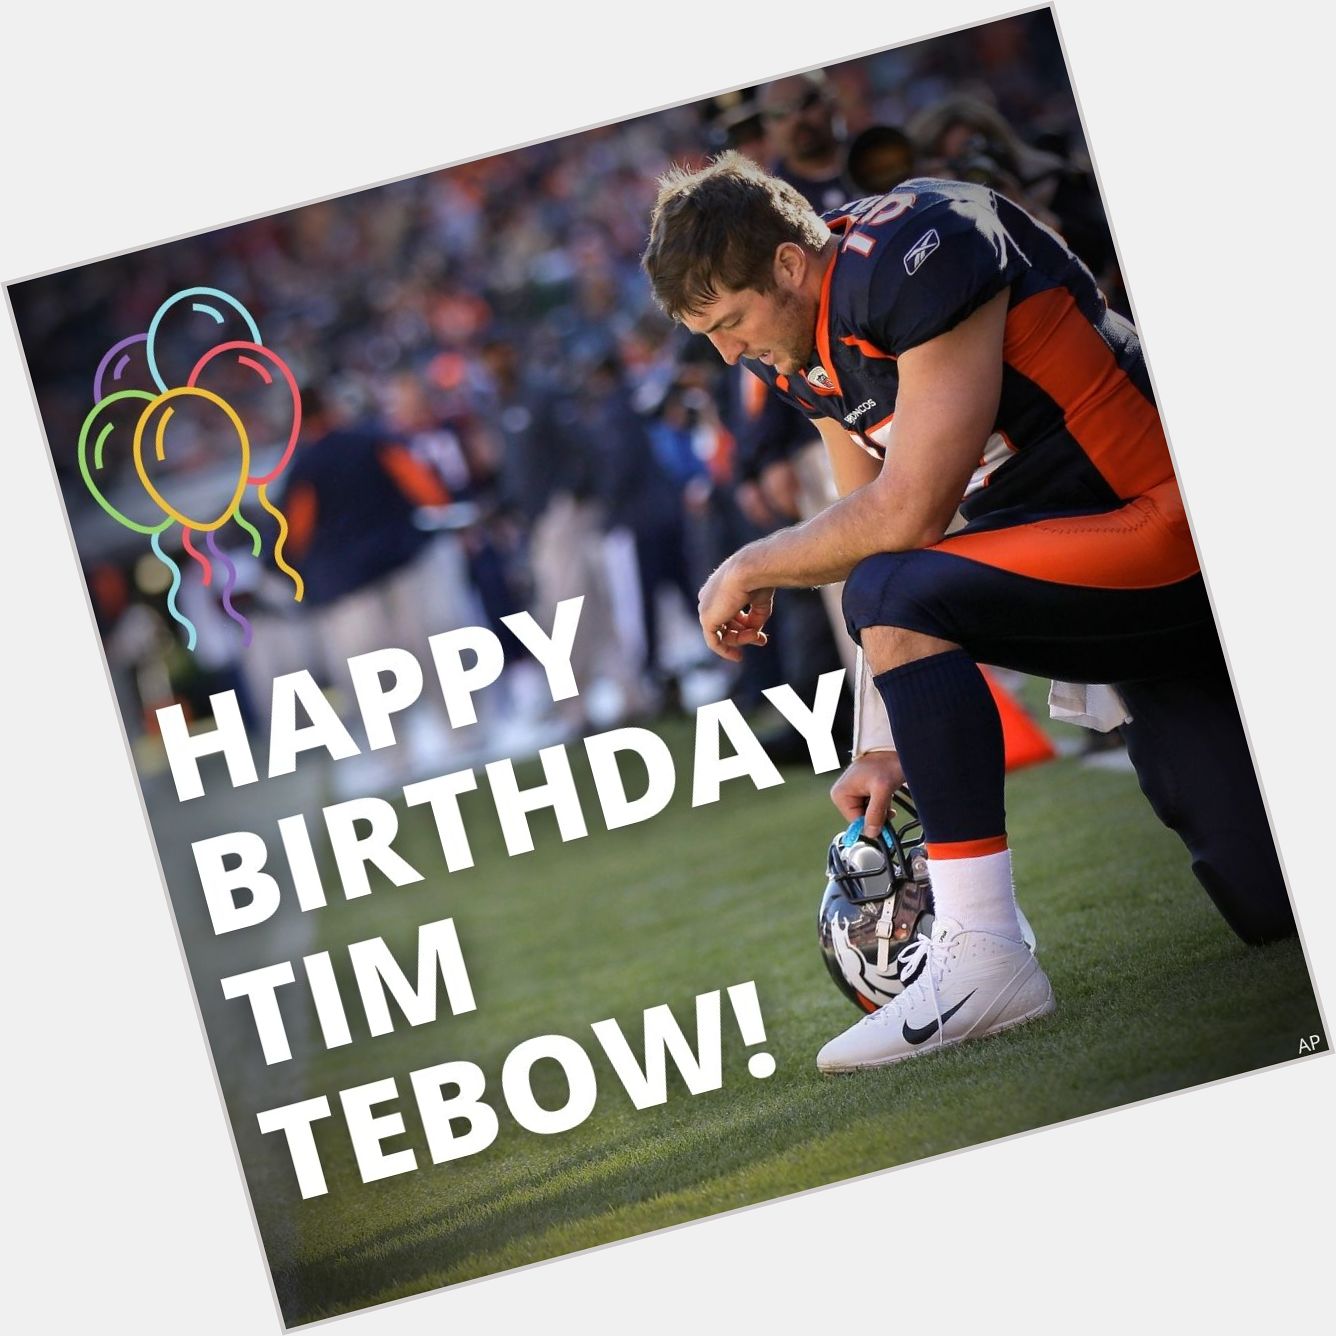 Happy 34th birthday to Tim Tebow! 